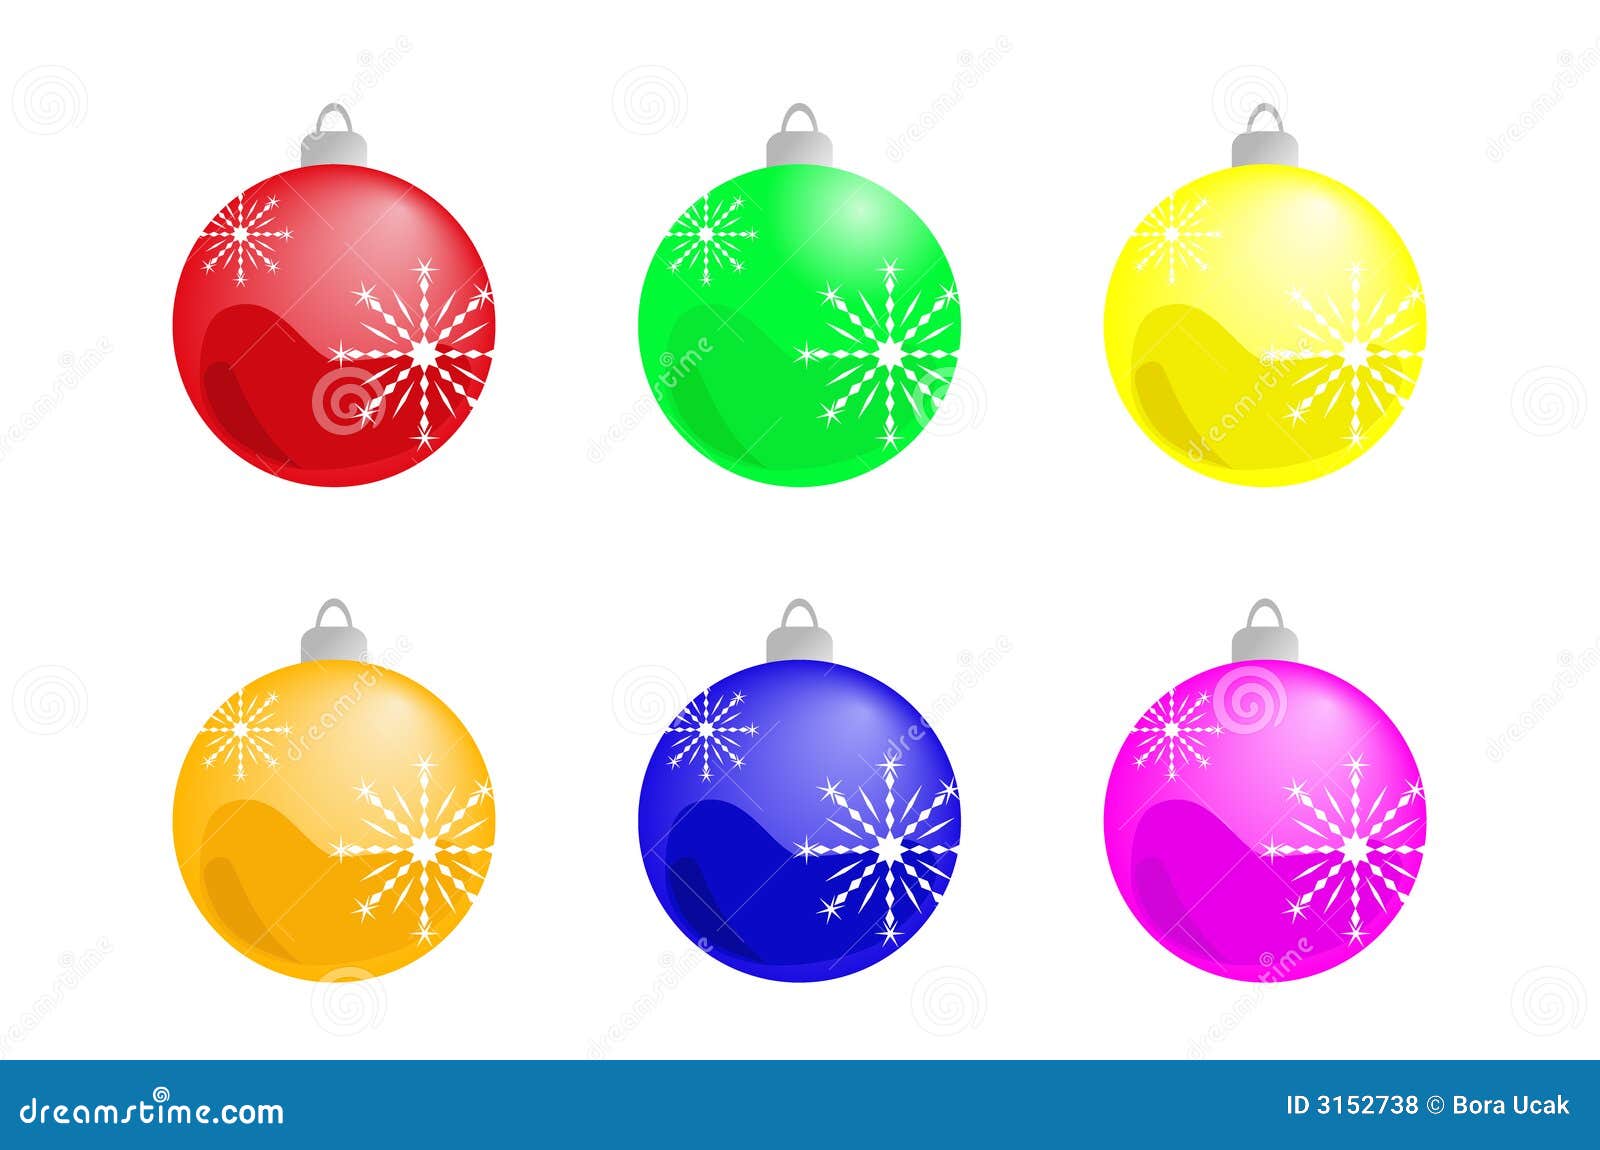 Christmas balls stock vector. Illustration of cold, ornaments - 3152738